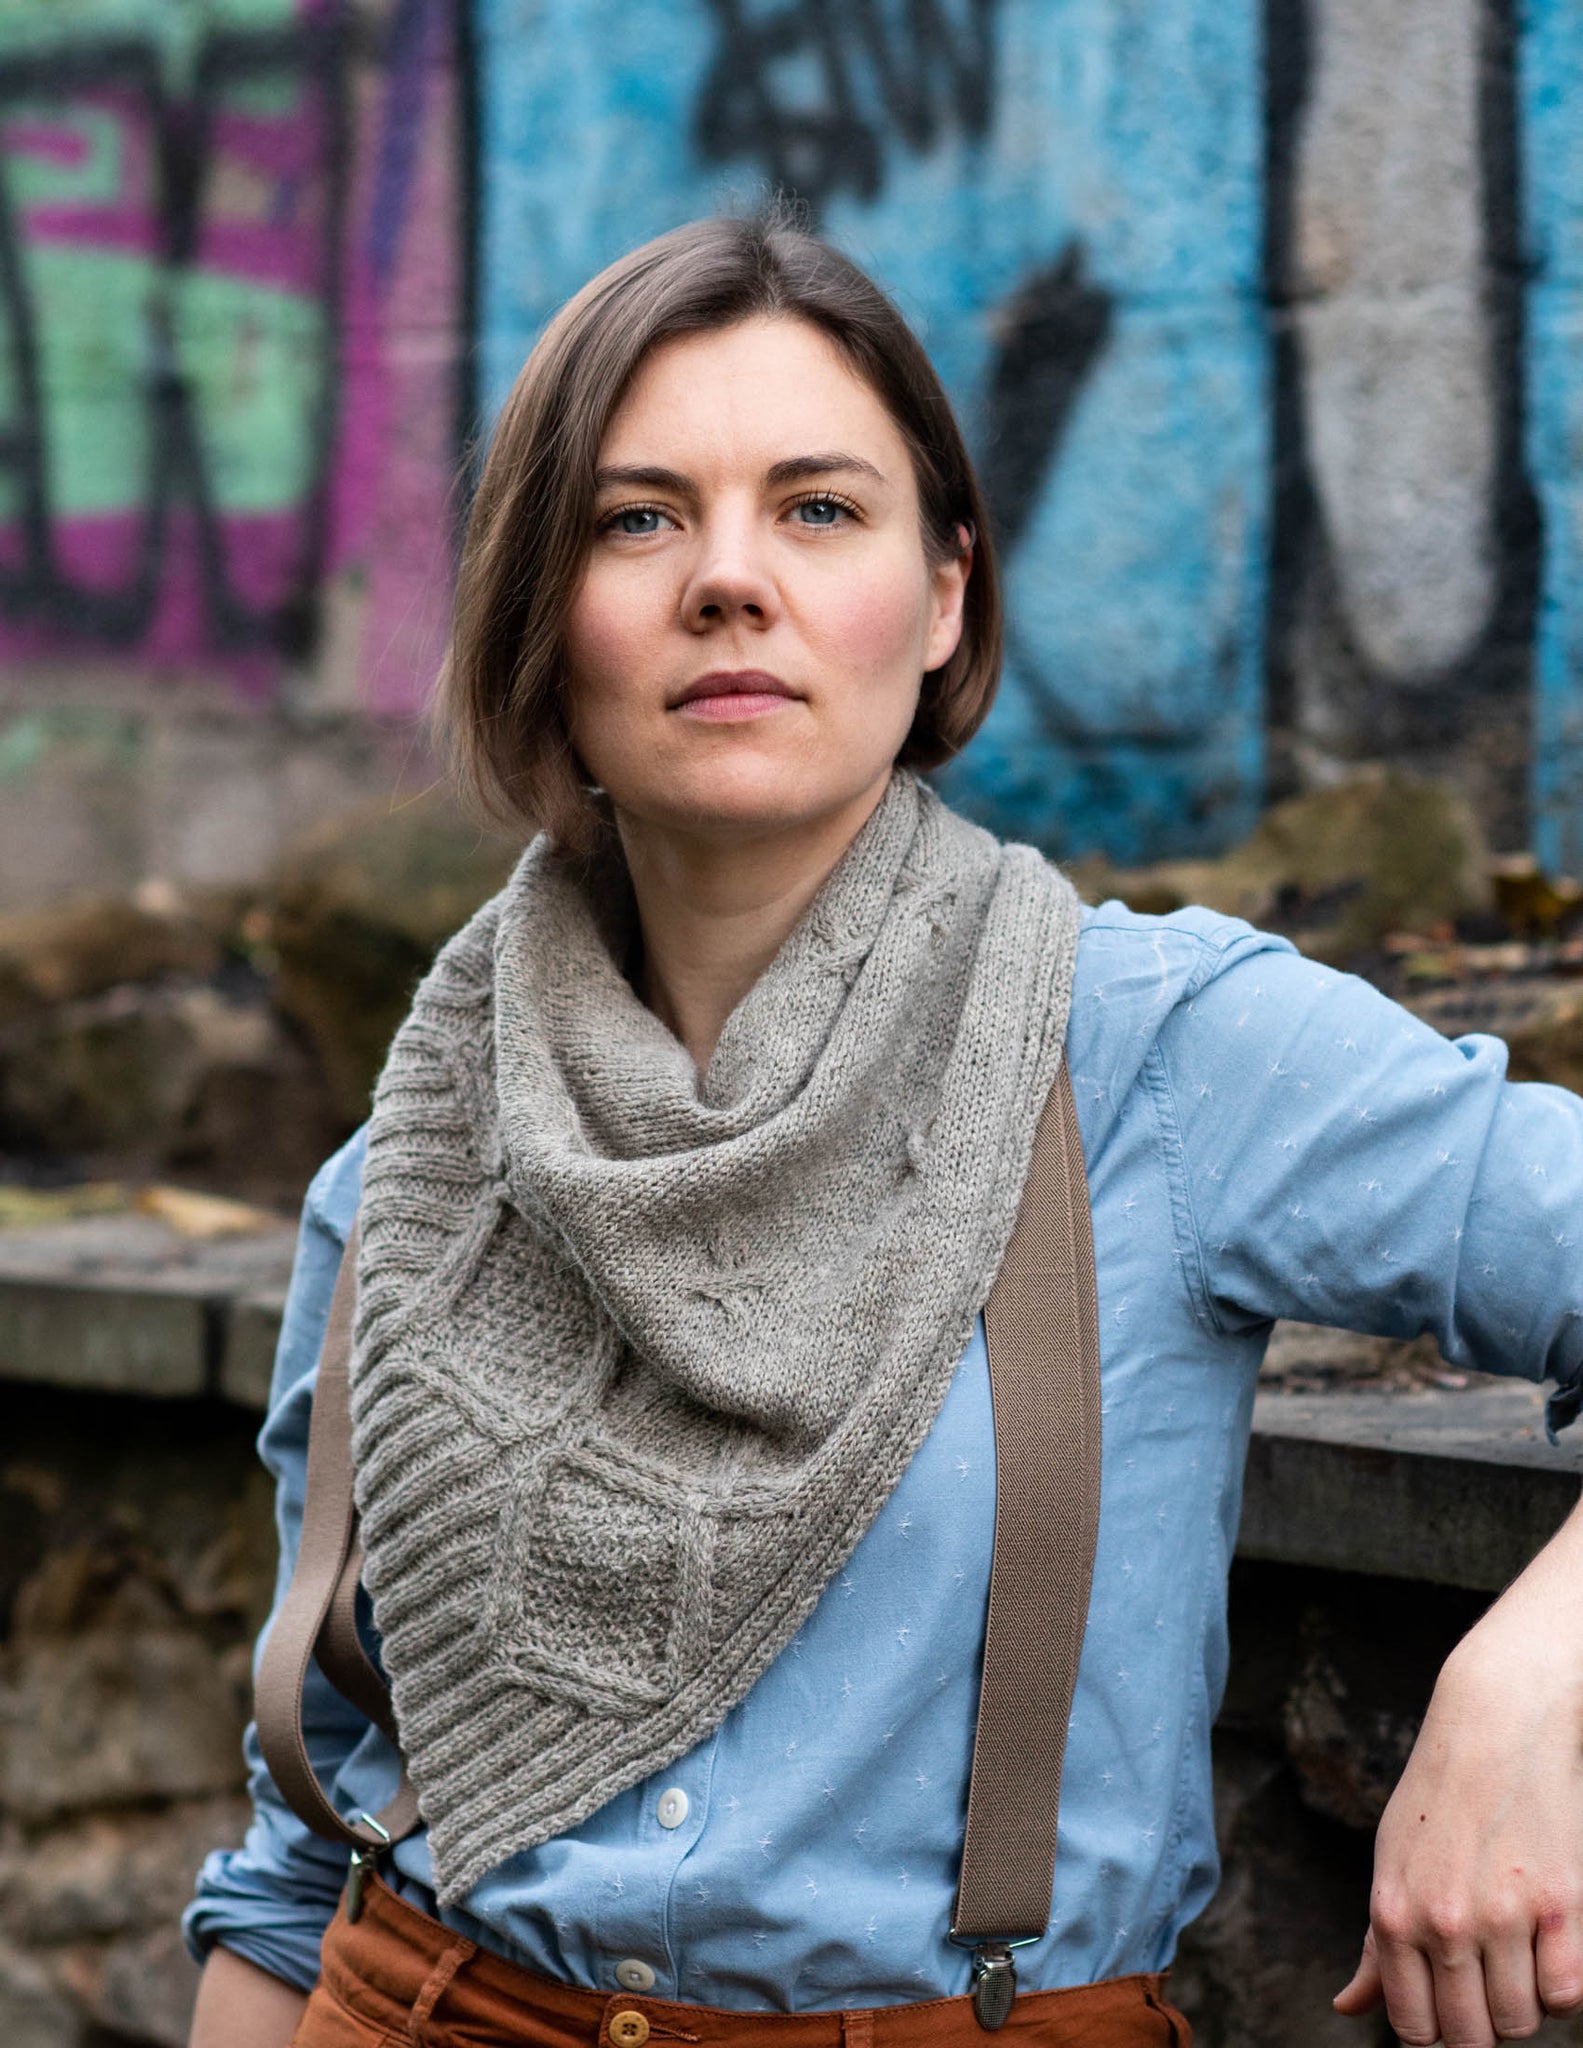 A white woman wears a grey cabled shawl wrapped round her neck, a blue shirt with braces and brown trousers. She leans one one elbow in front of a graffitied background.  